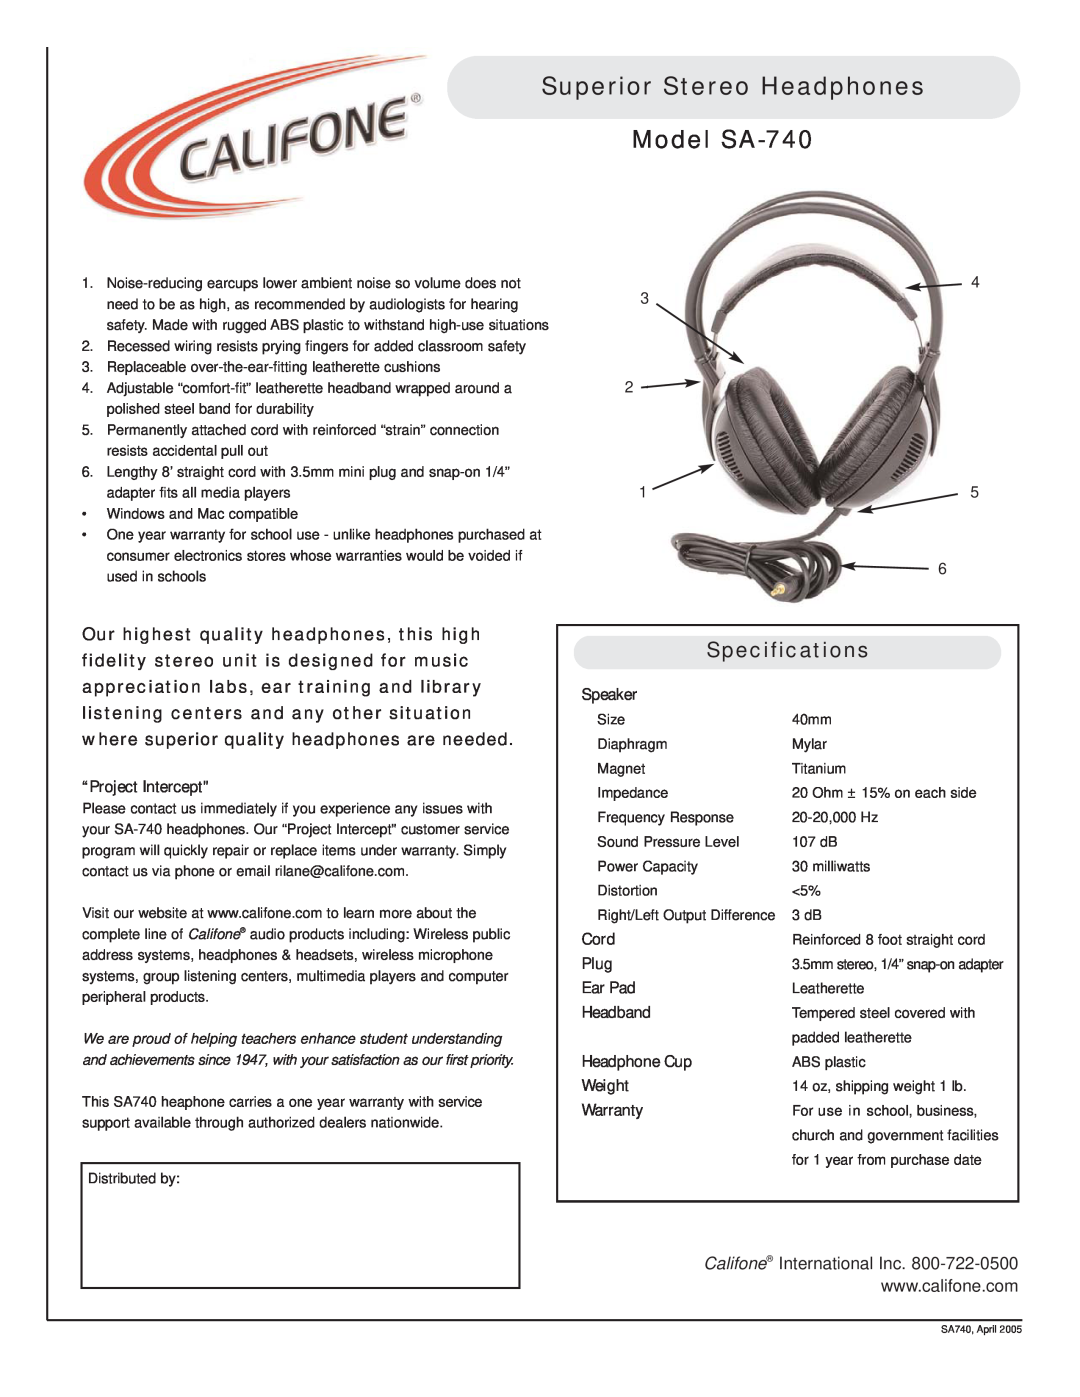 Califone specifications Superior Stereo Headphones Model SA-740, Specifications, “Project Intercept, Speaker, Cord 